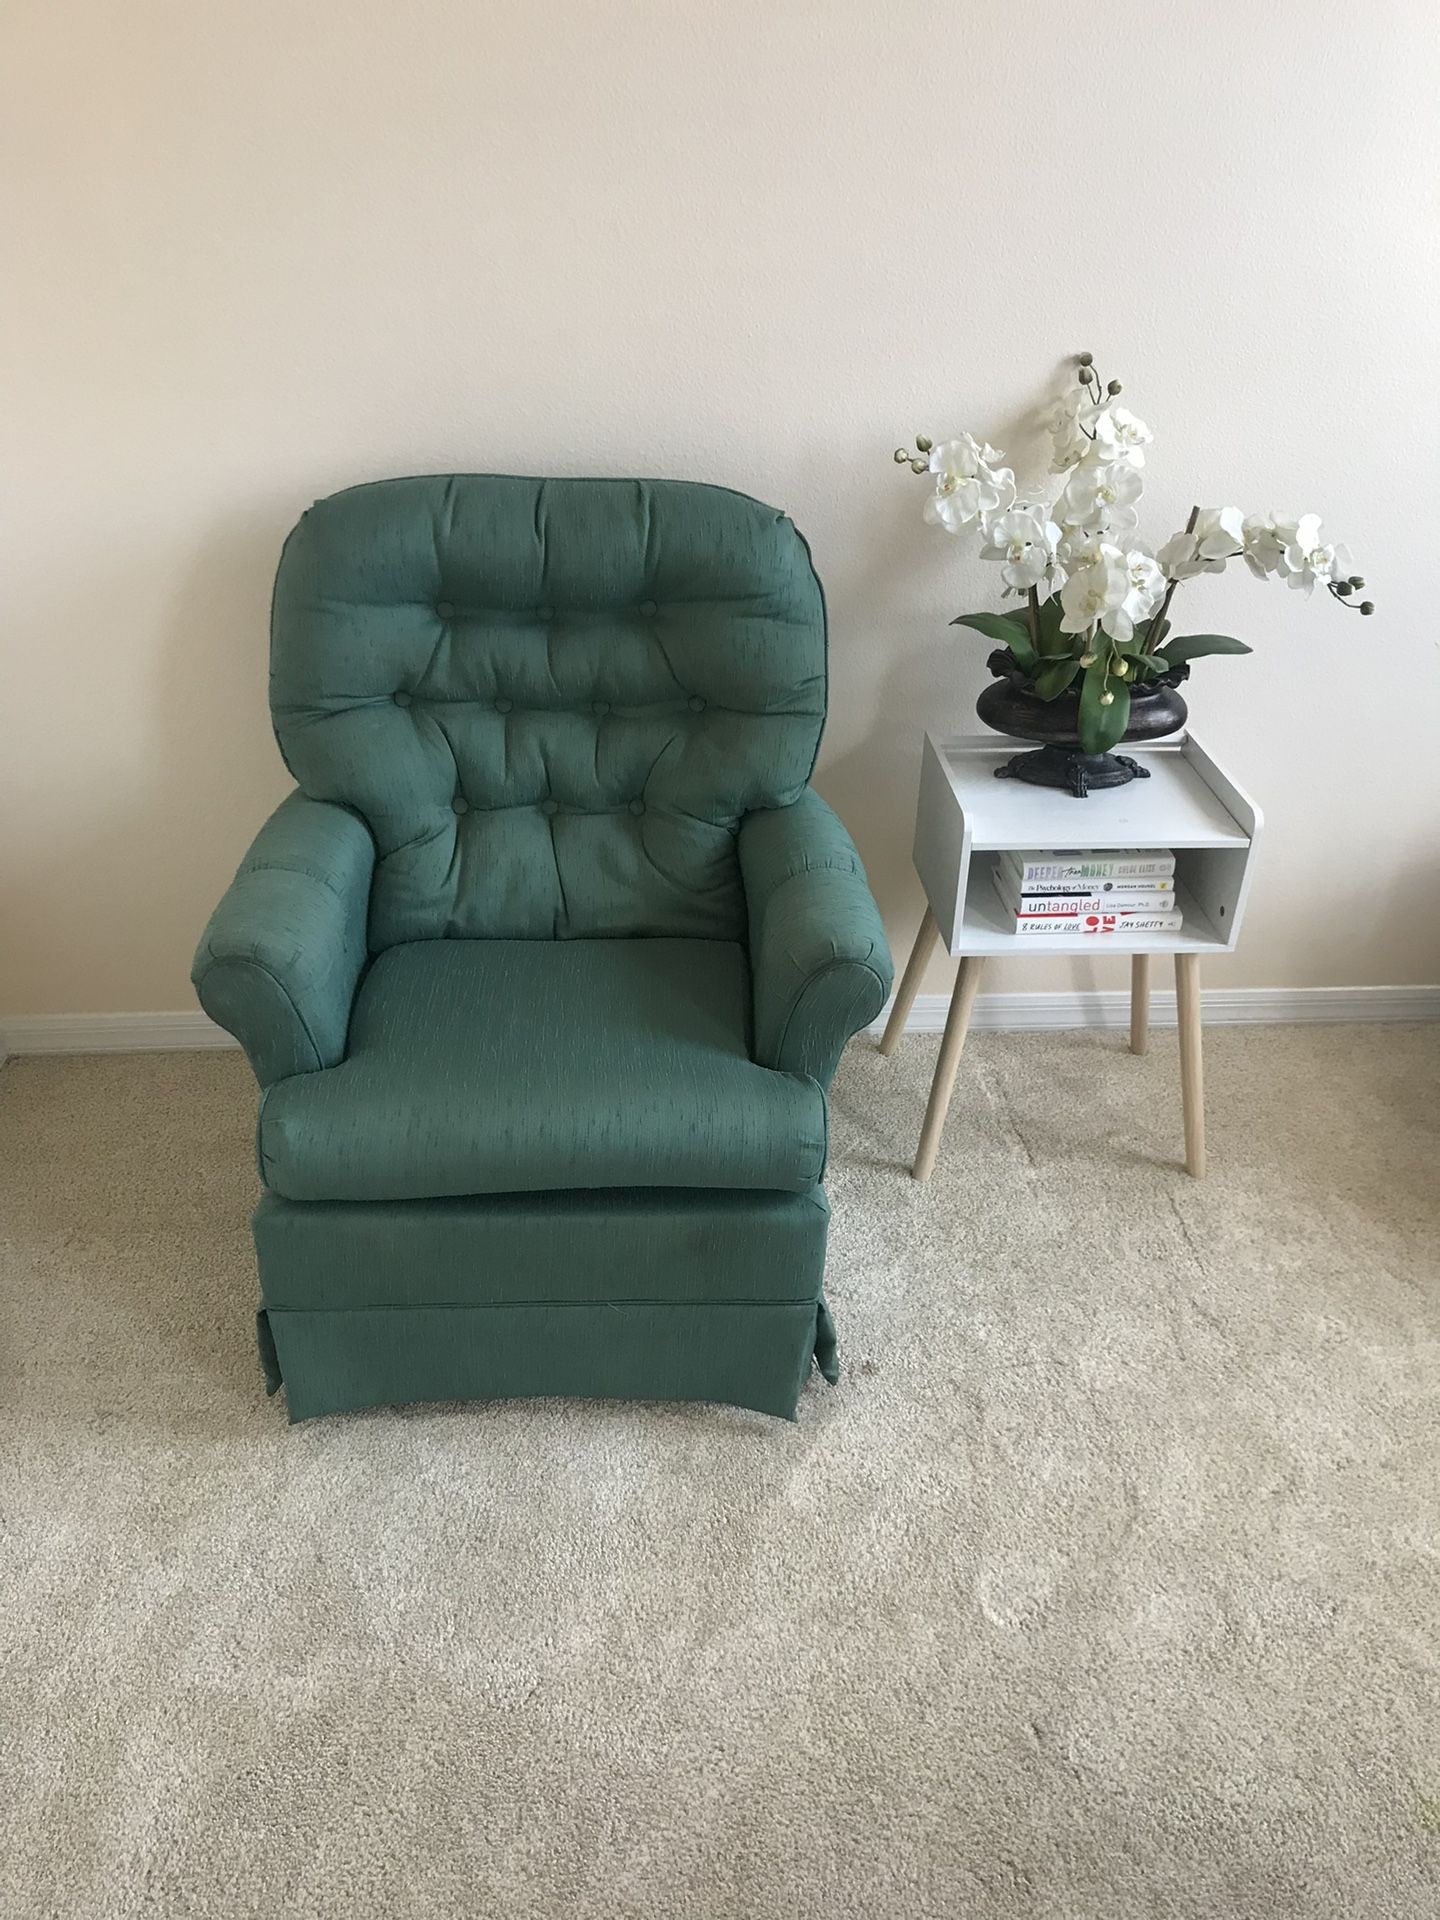 Vintage Green Fabric Swivel Chair In Great Condition FREE Local Delivery 🚚 